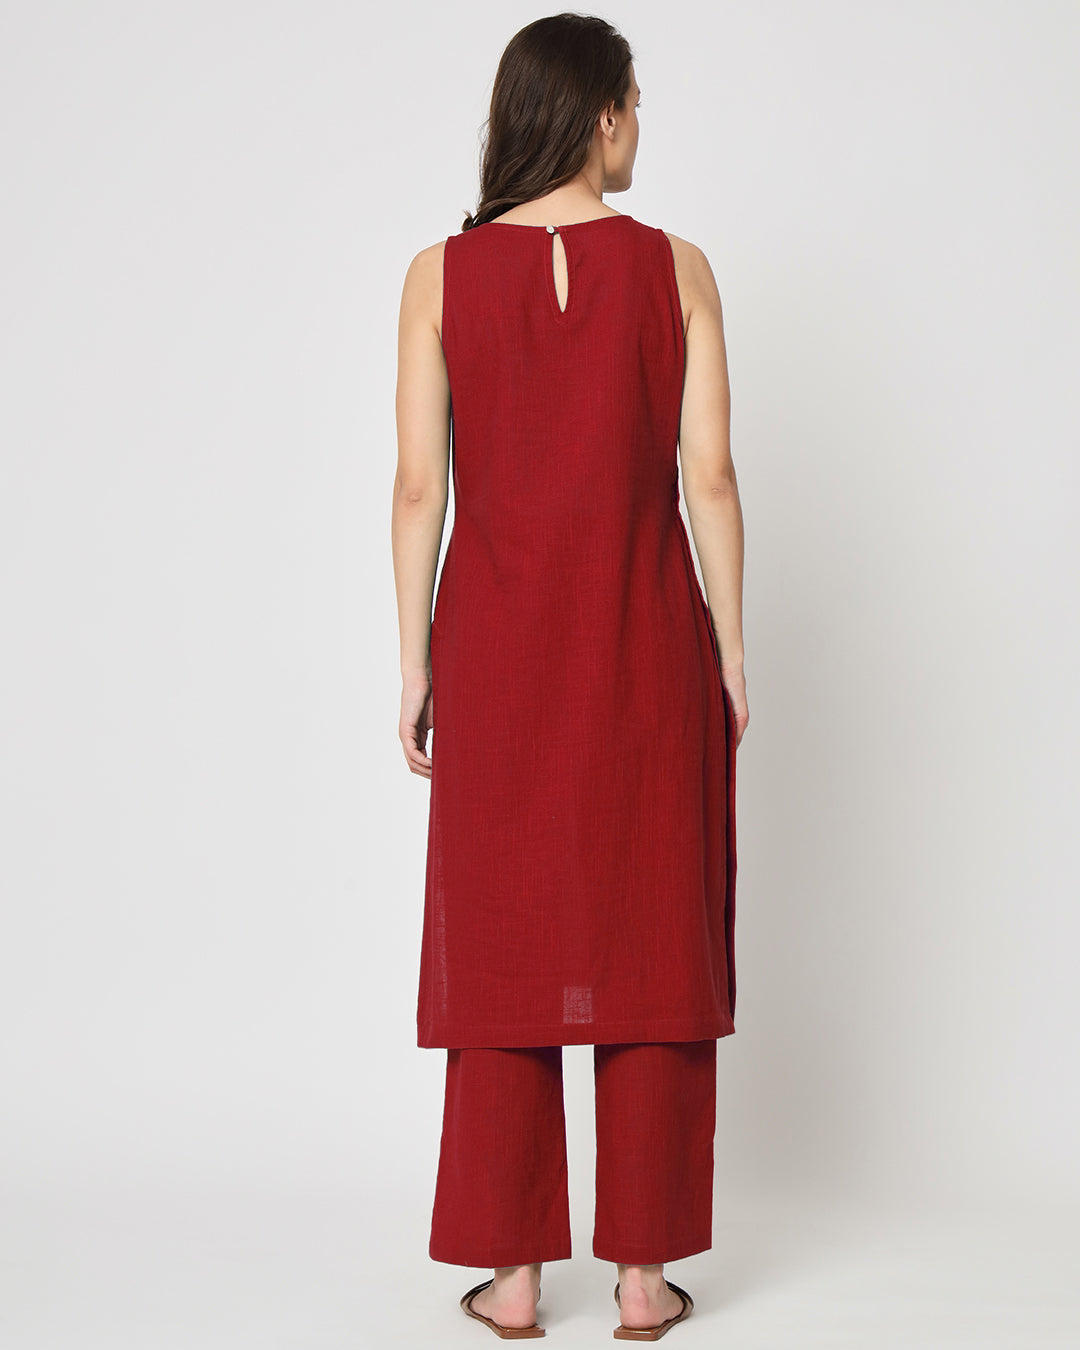 Classic Red Sleeveless Long Solid Kurta (Without Bottoms)